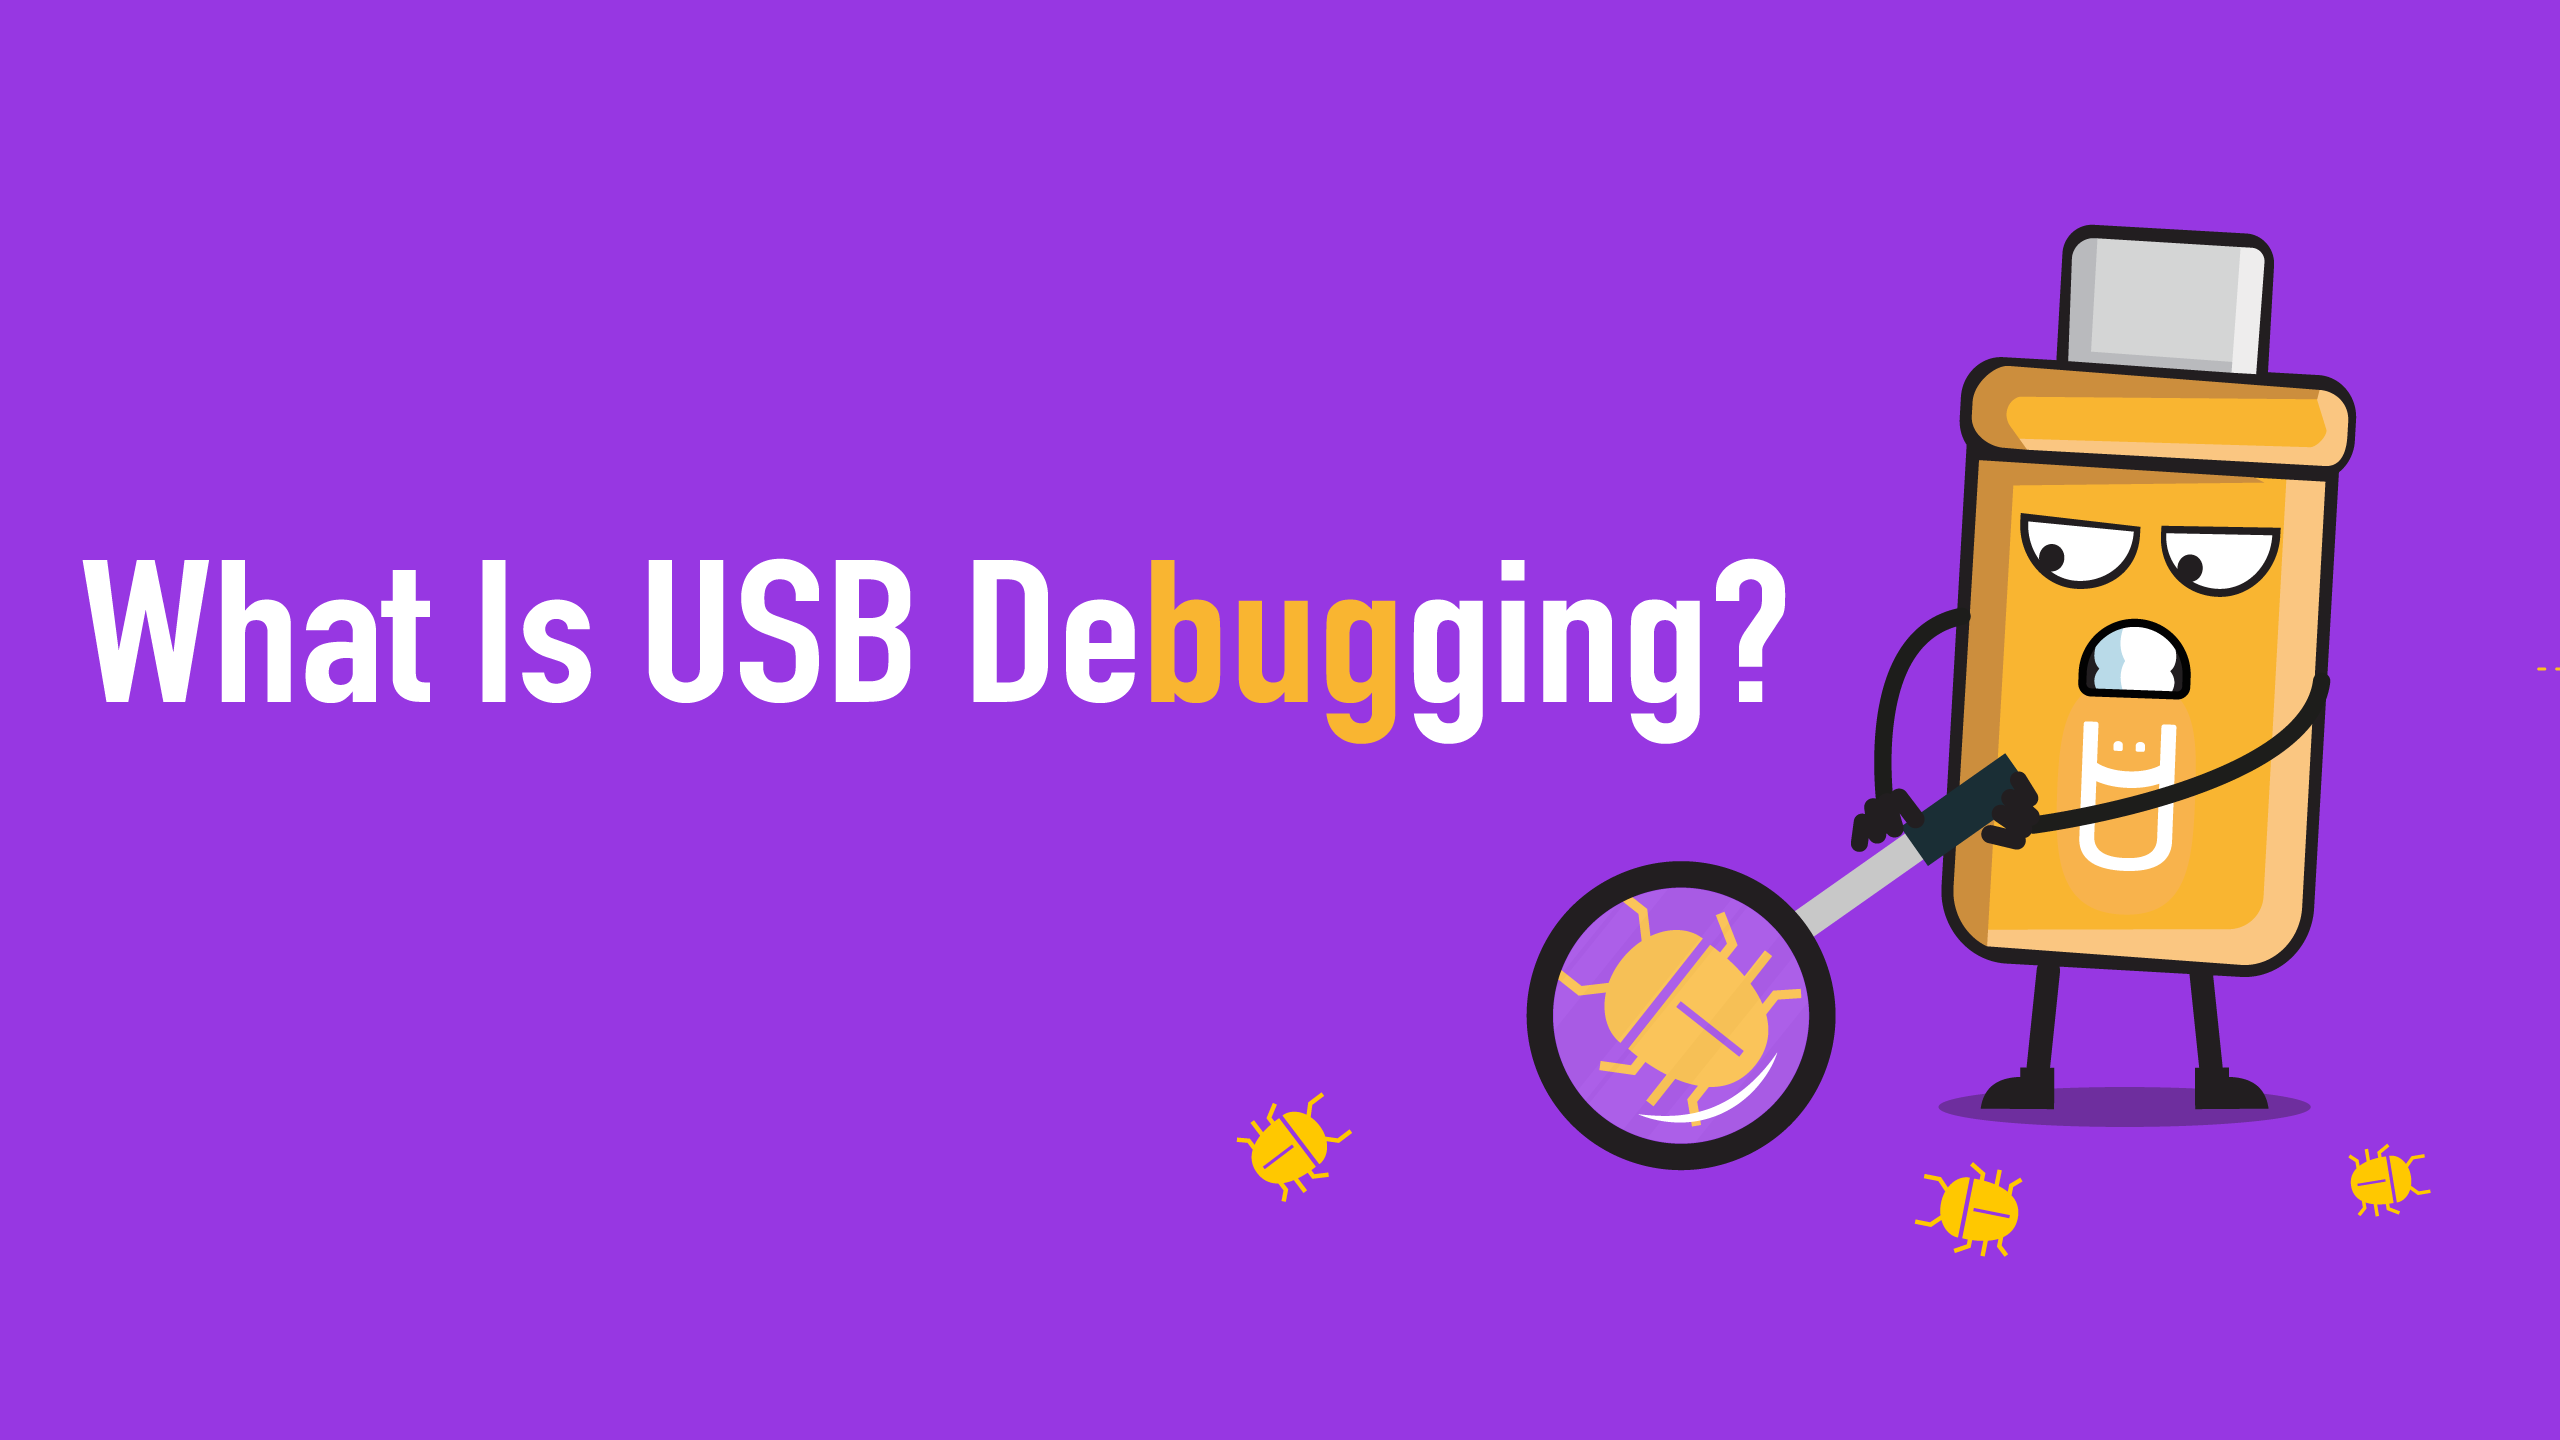 What Is USB Debugging?